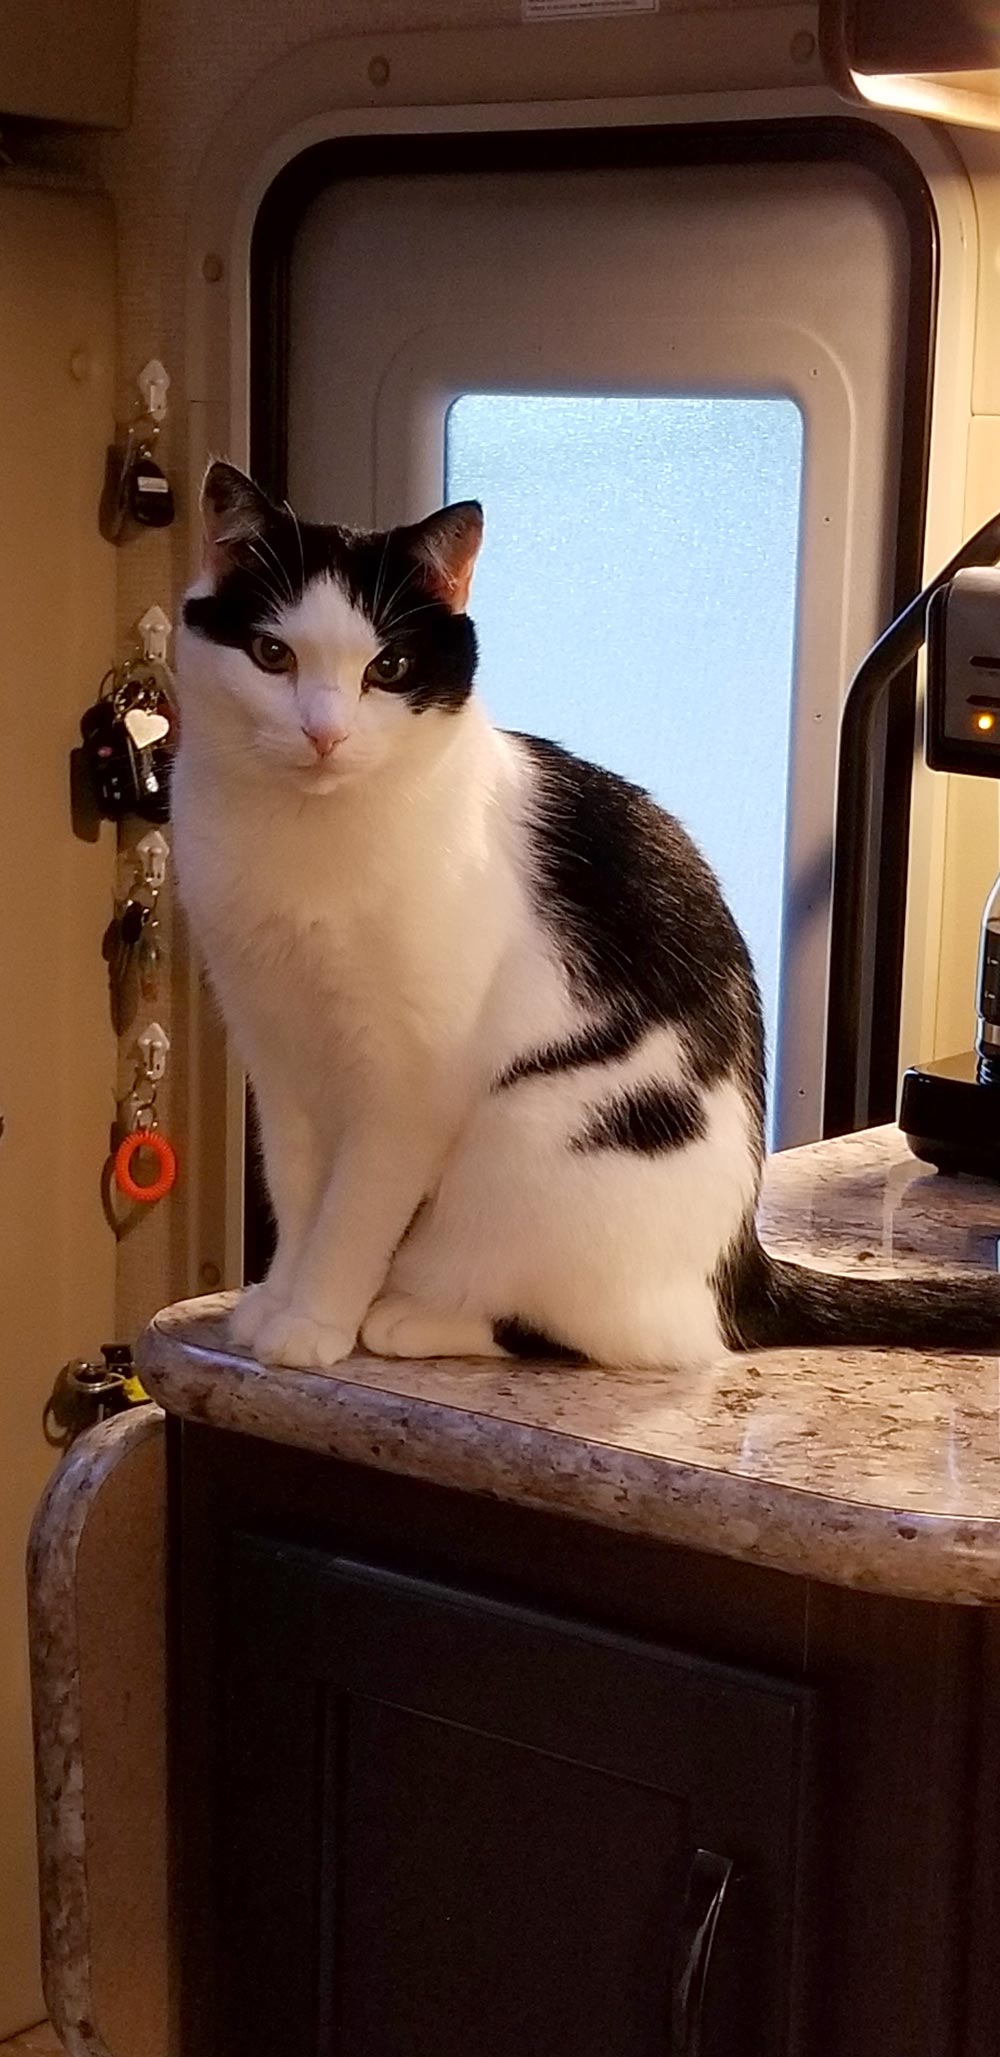 Meet Jay II, Epping, NH’s Roger and Nancy’s 13-year-old black and white cat who is curious about everything. When they started camping in their RV, they didn’t hesitate to bring him along.